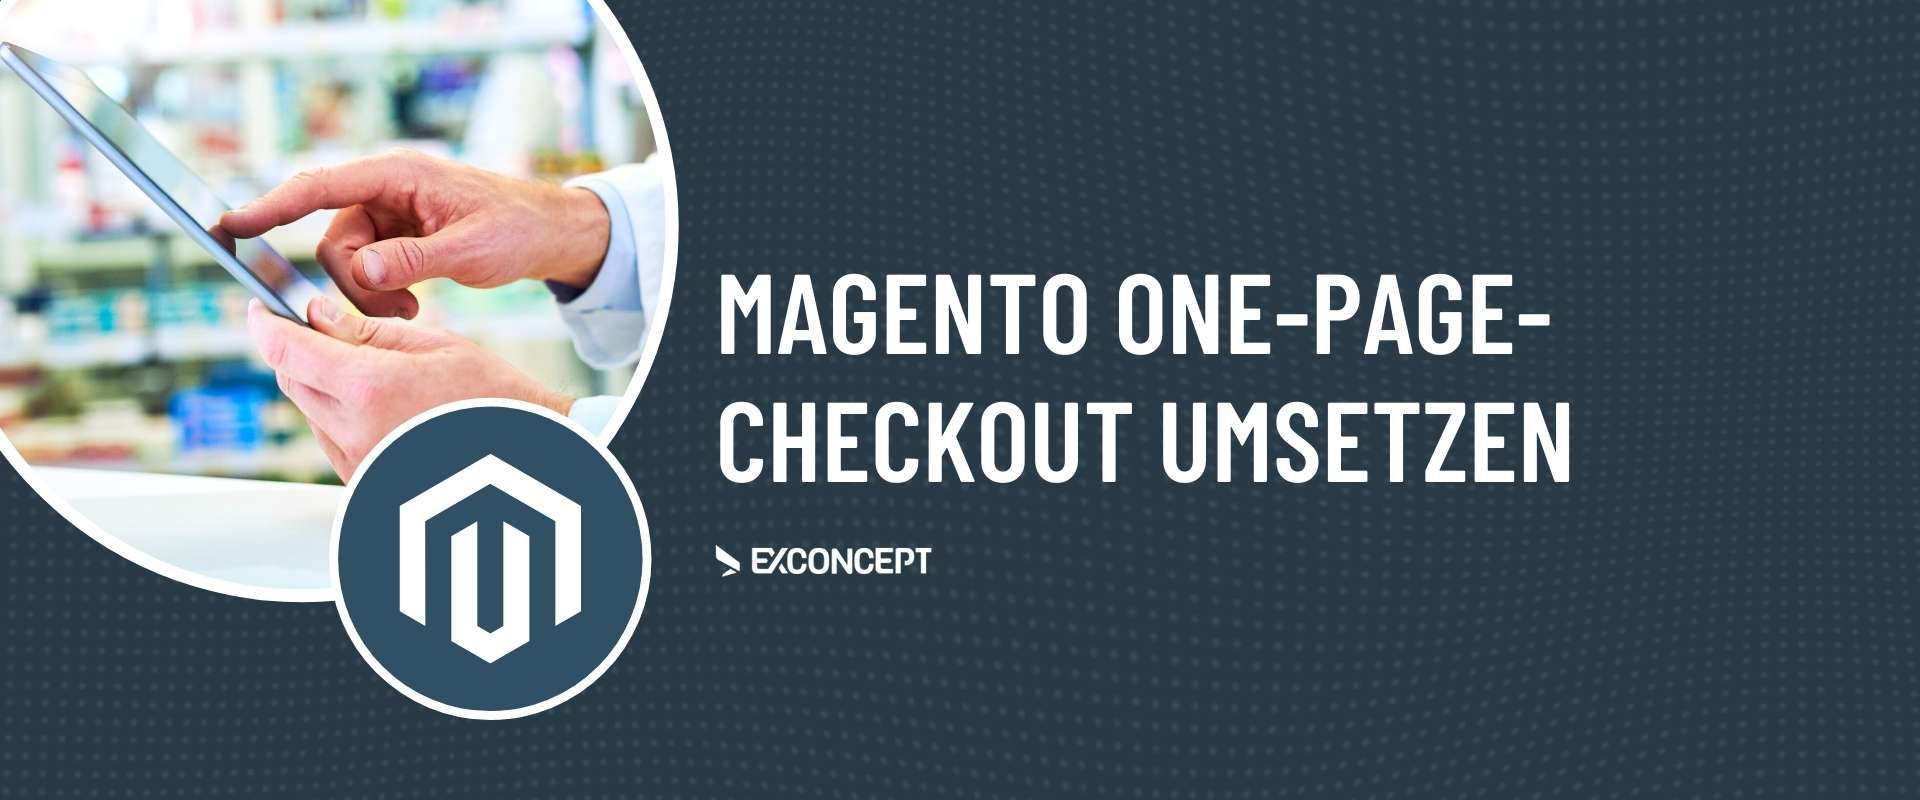 Magento Support - One-Page-Checkout